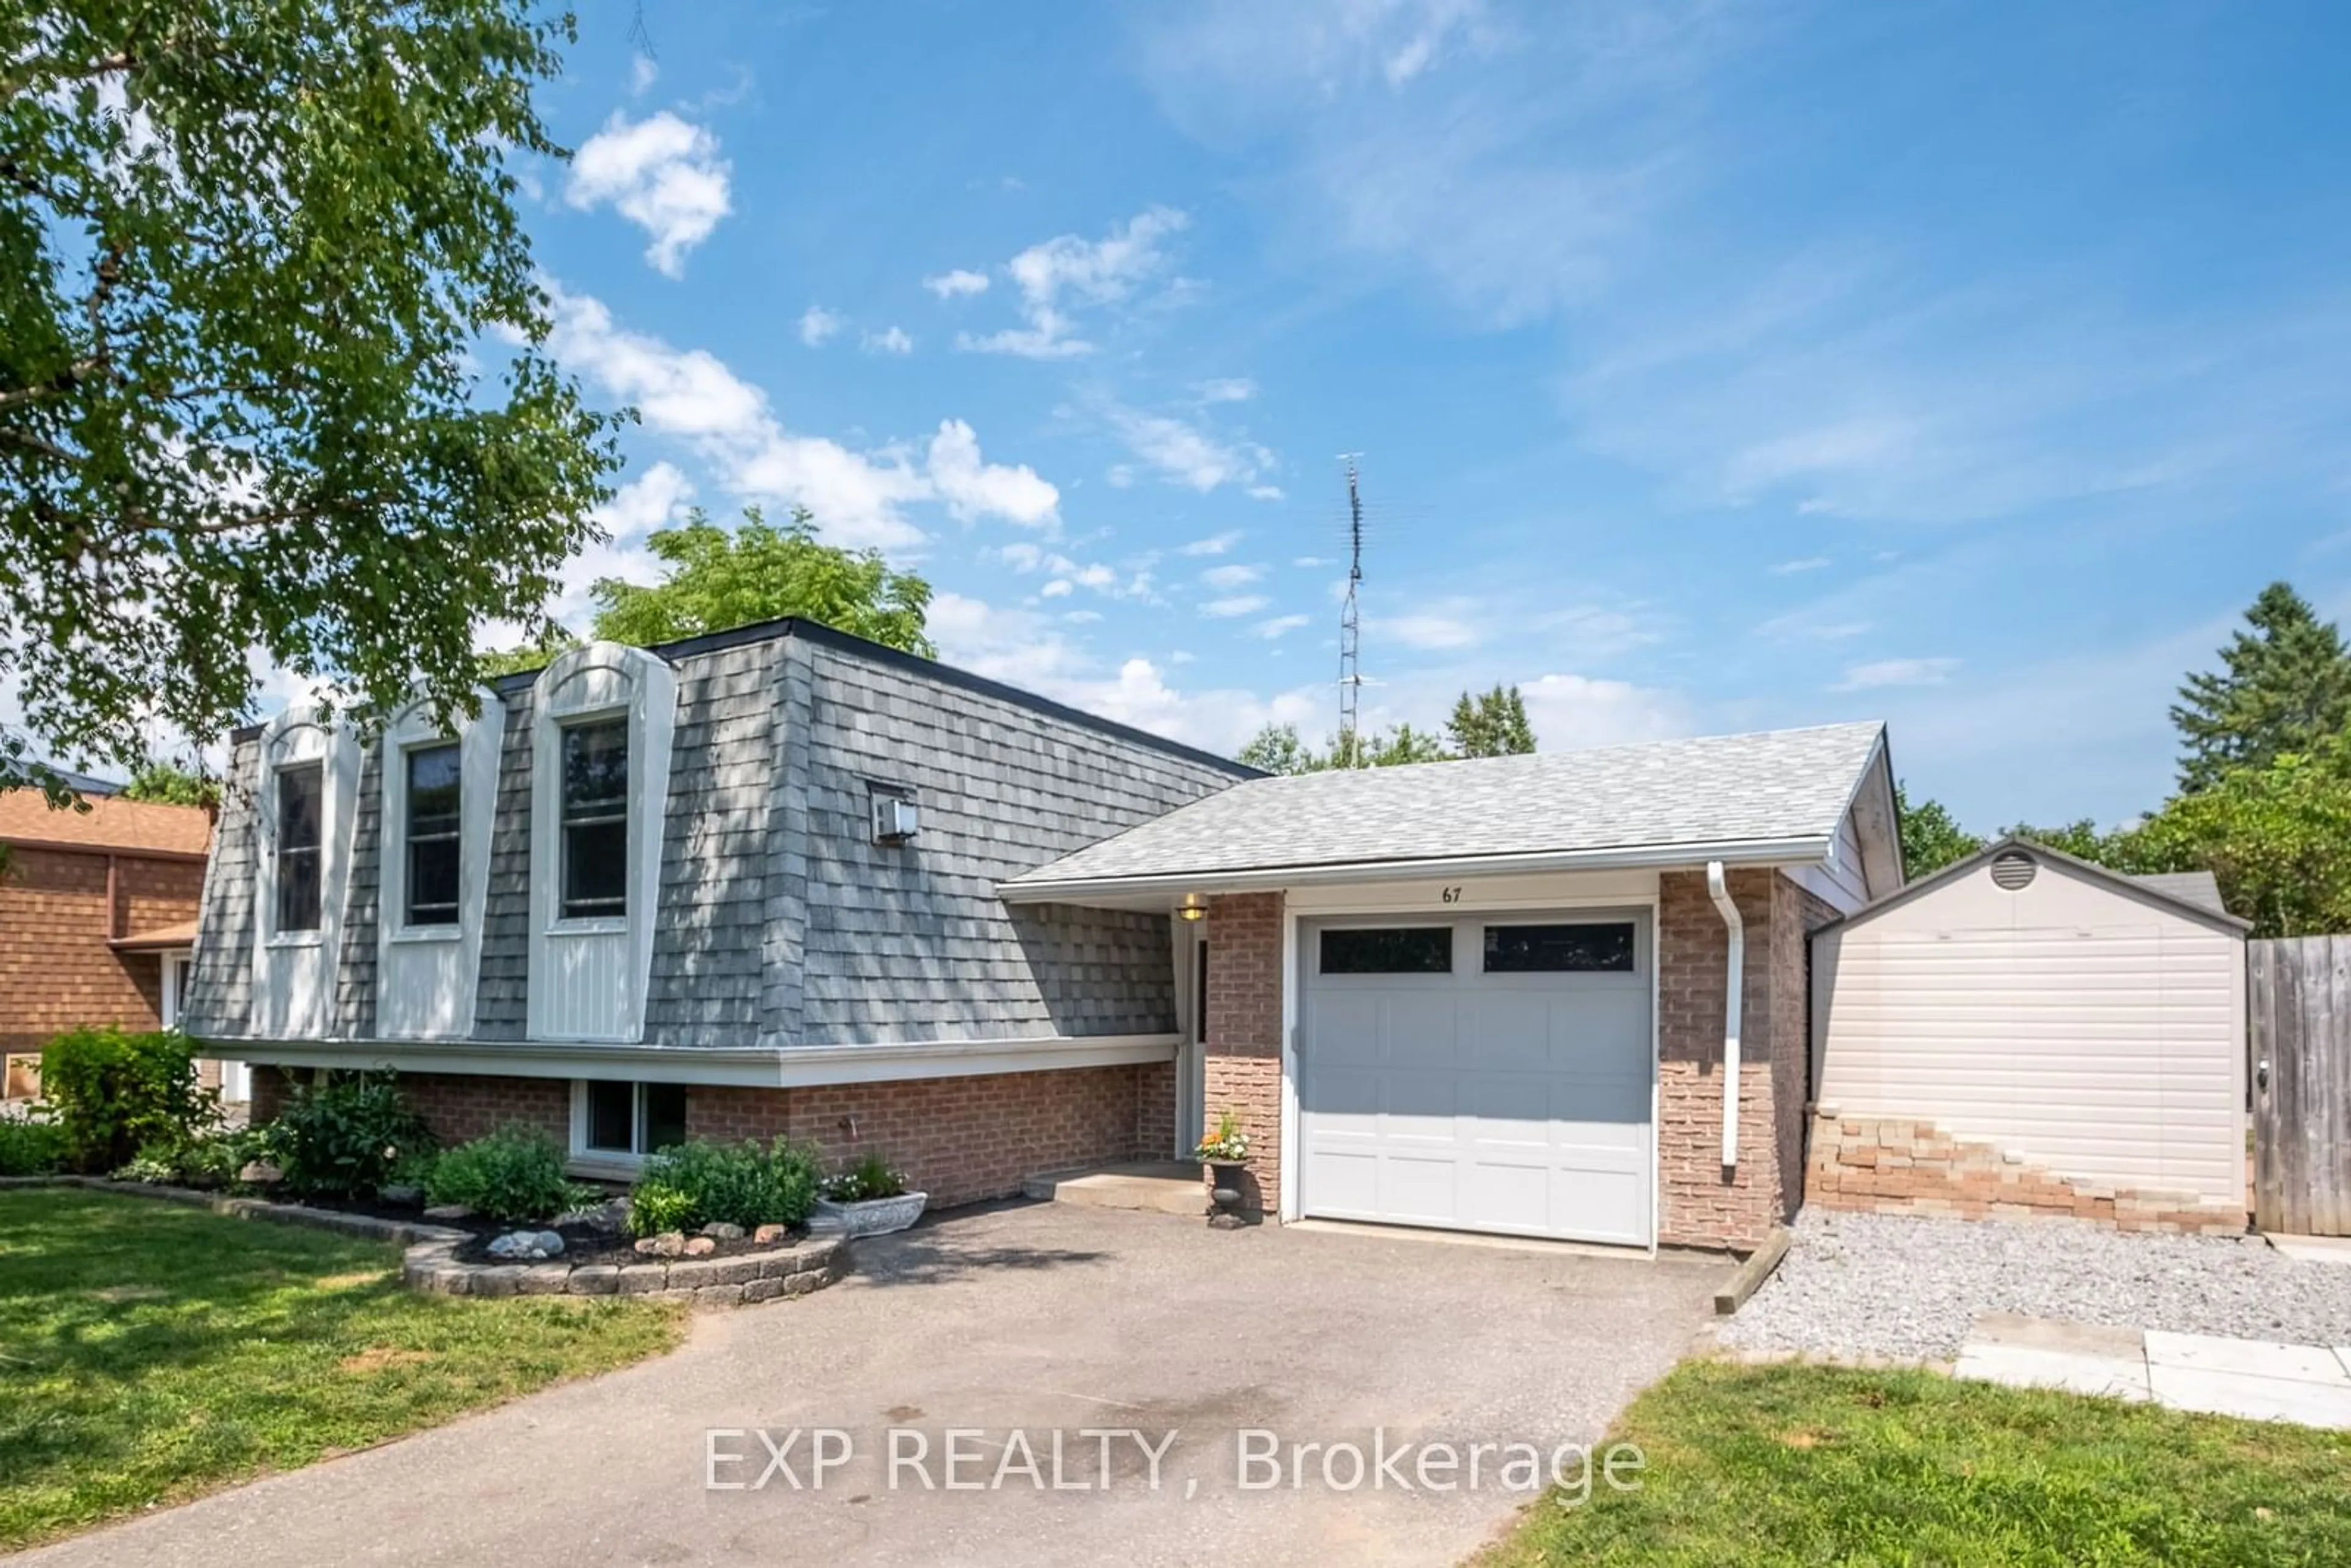 Frontside or backside of a home for 67 Crossley Dr, Port Hope Ontario L1A 3T6